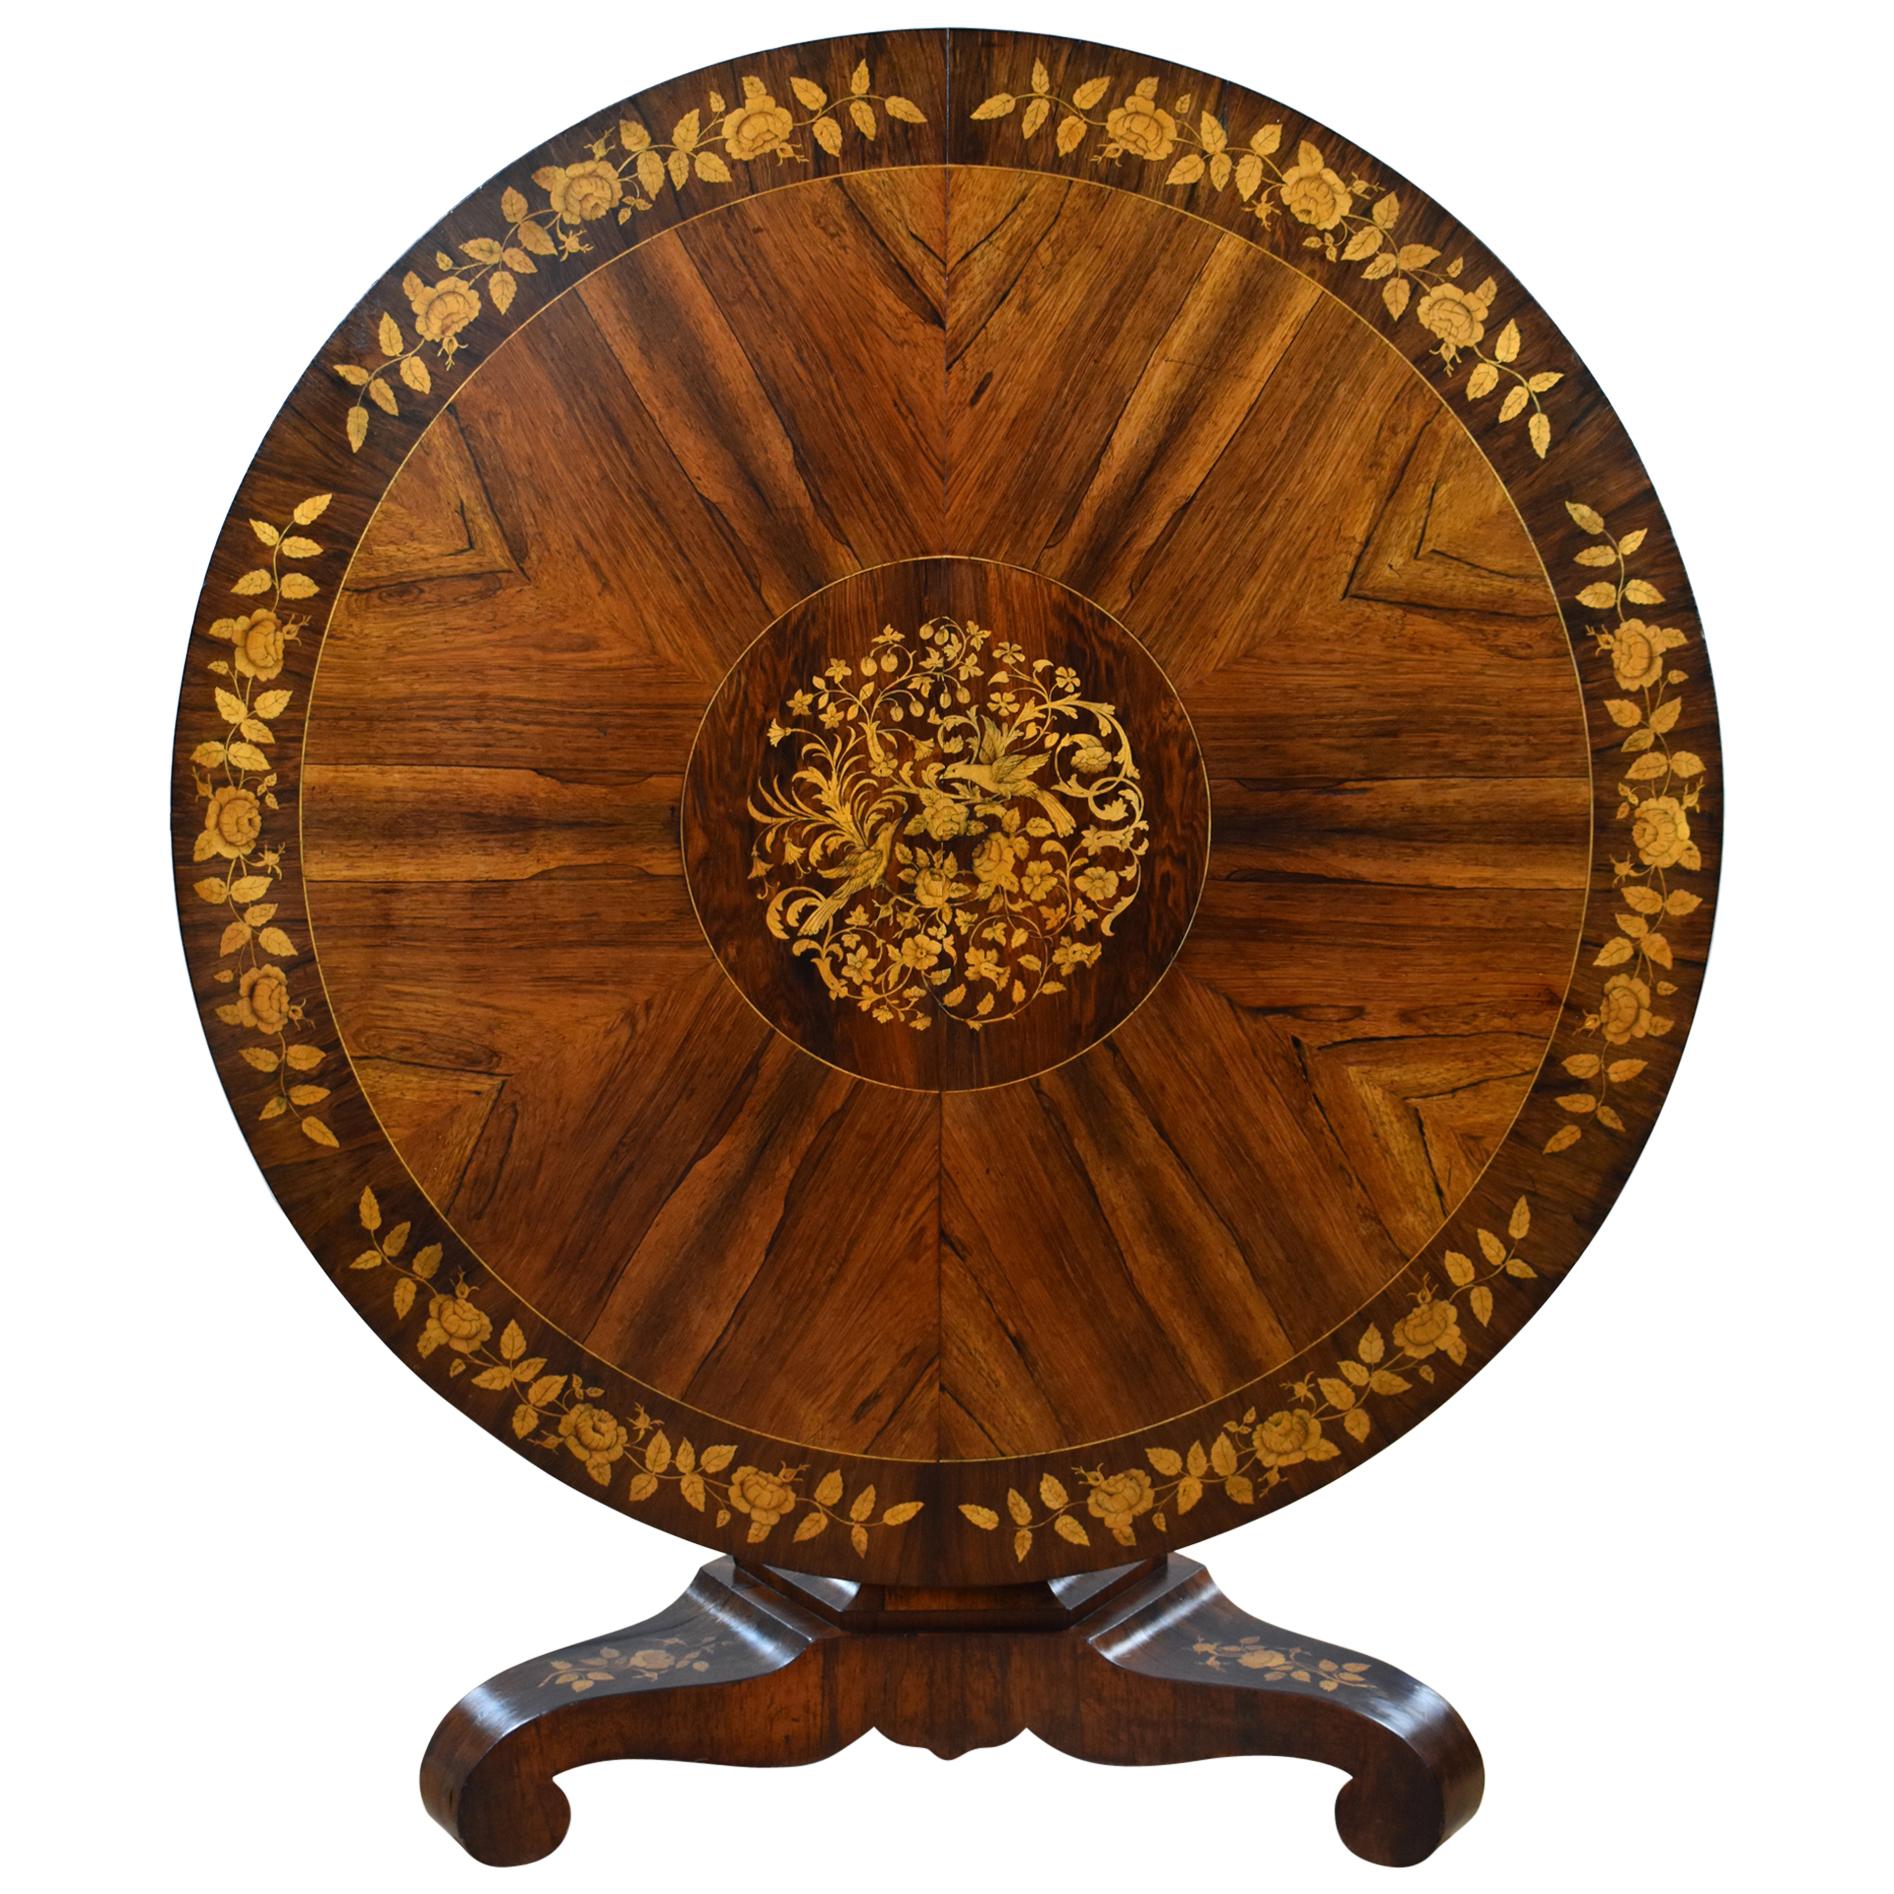 19th Century English Victorian Rosewood Marquetry Circular Table by Druce & Co